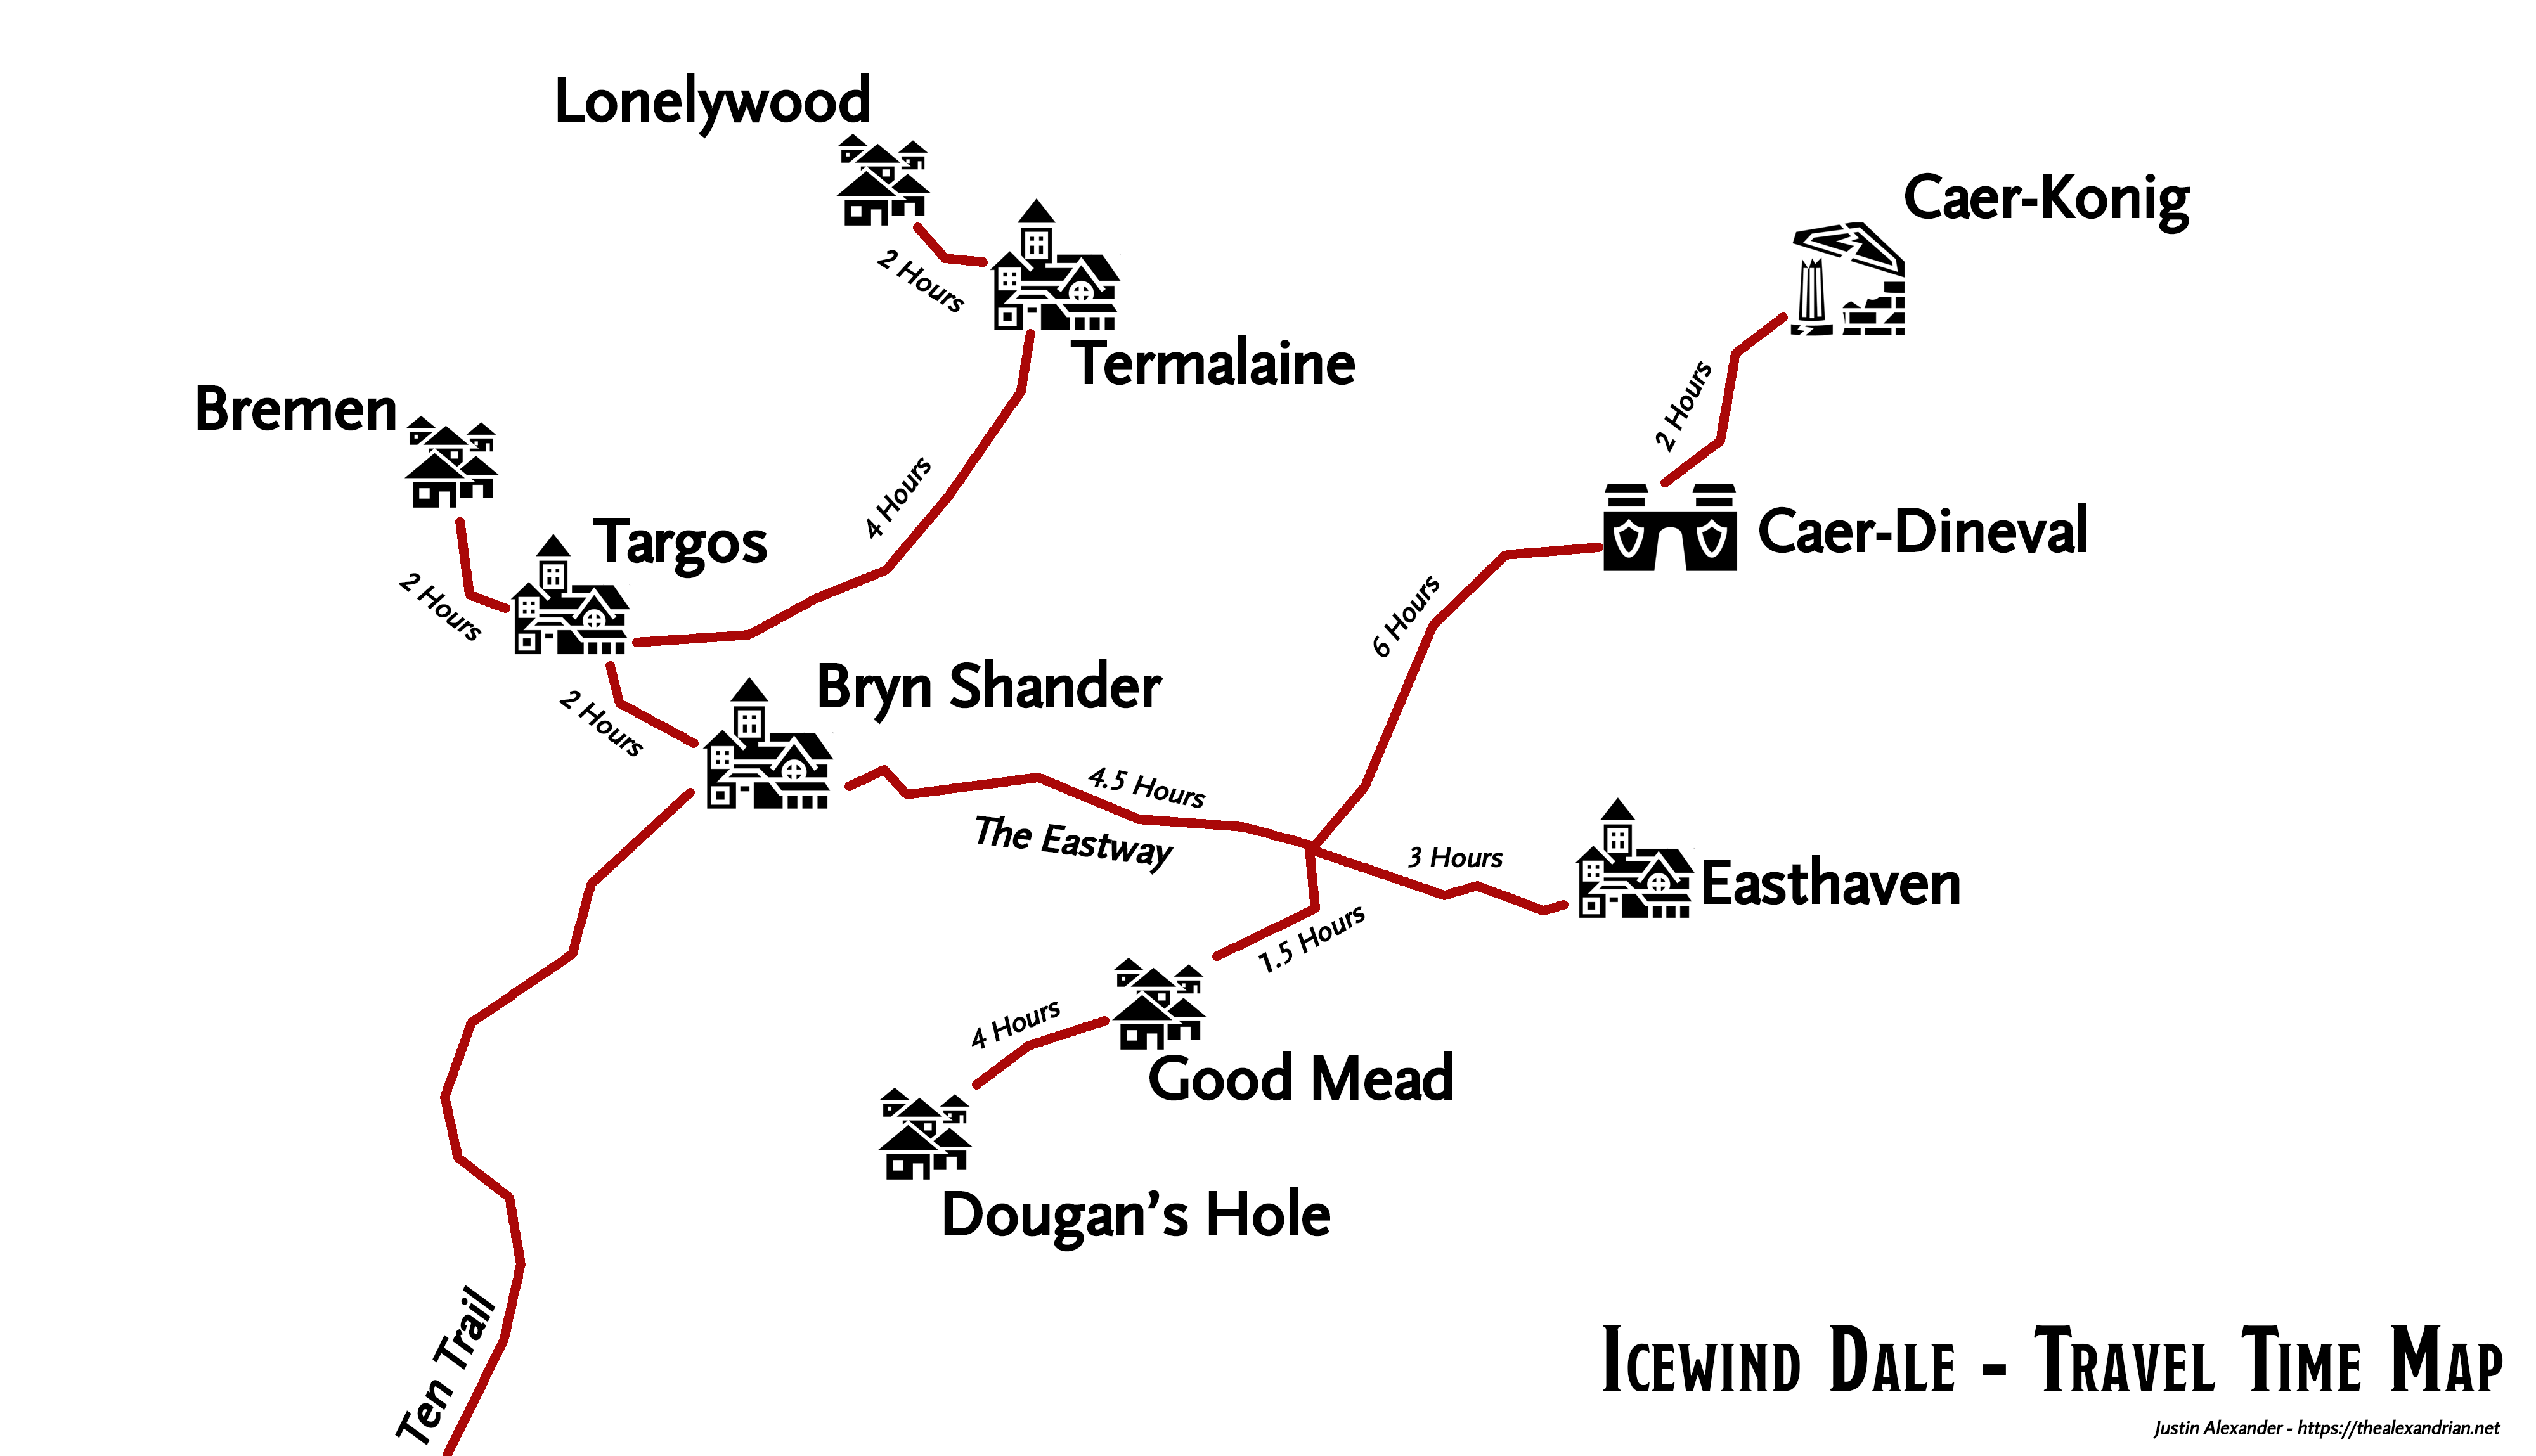 Icewind Dale - Travel Time Map